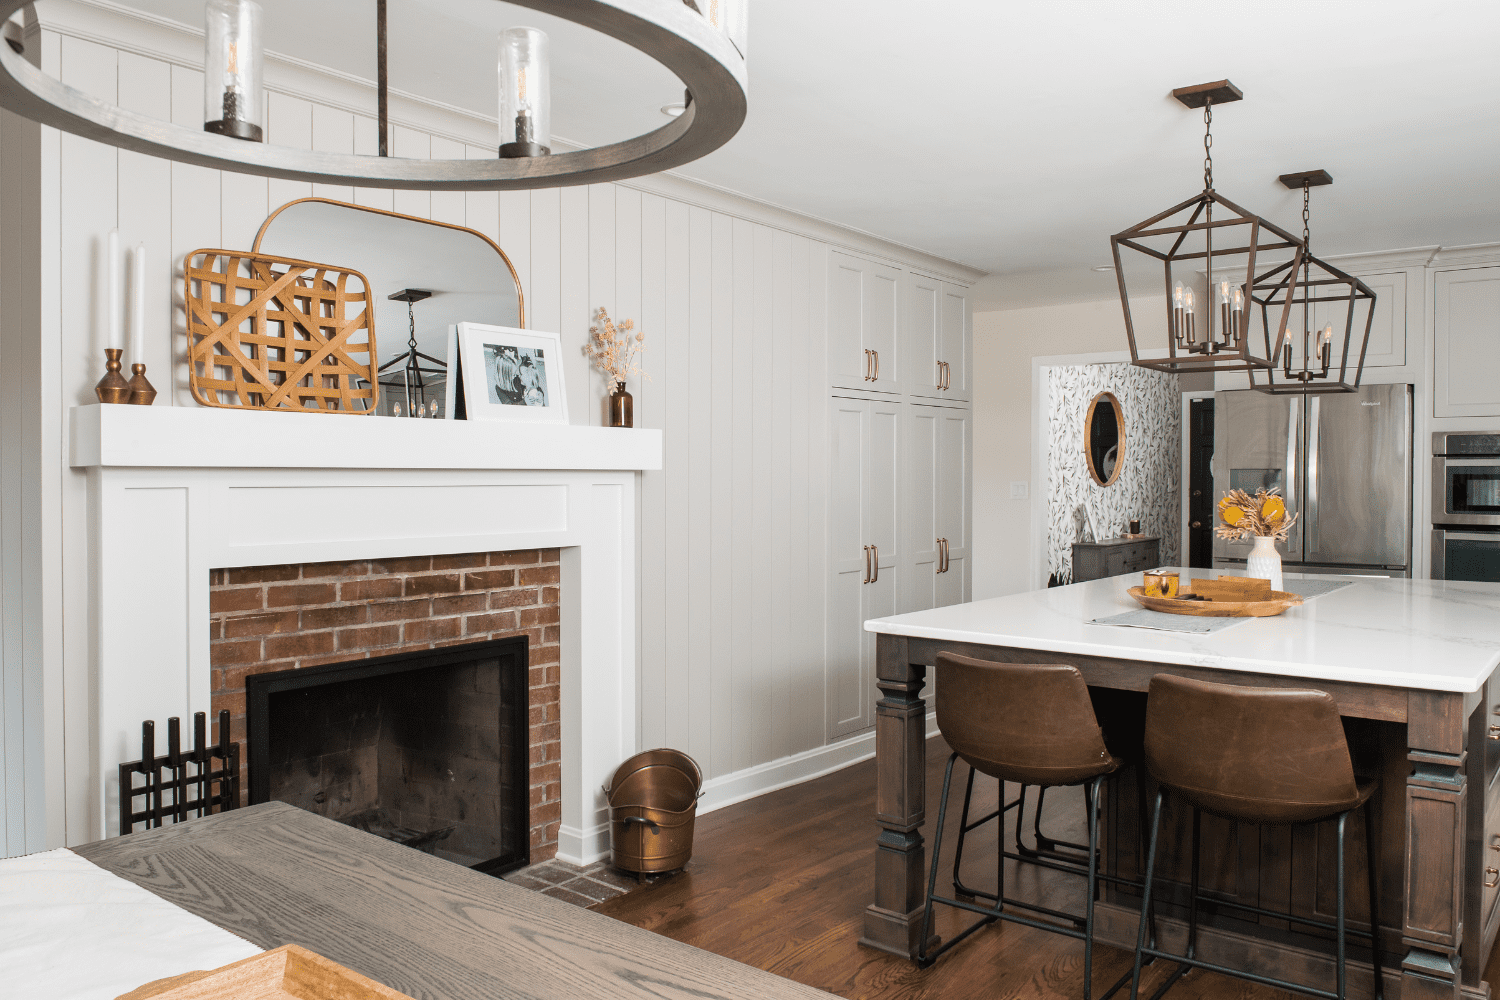 Nicholas Design Build | A kitchen with a large island and a fireplace.